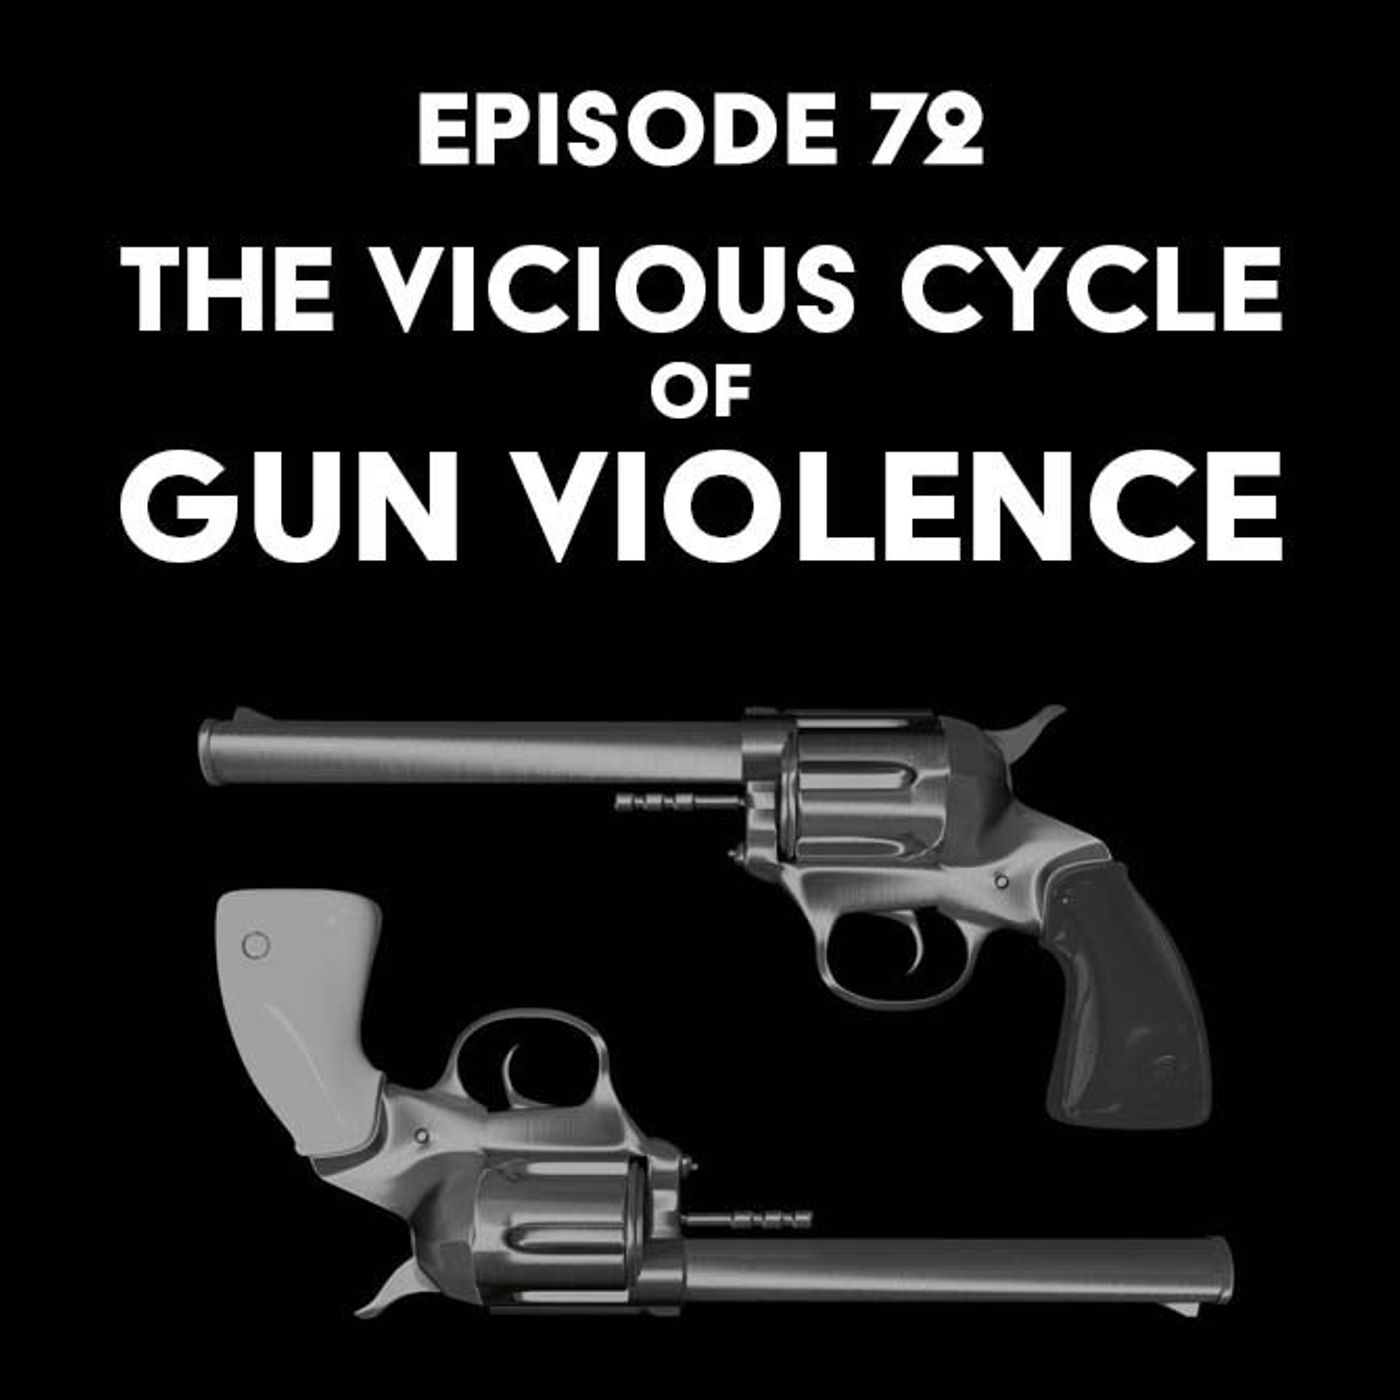 S1 Ep72: The Vicious Cycle of Gun Violence